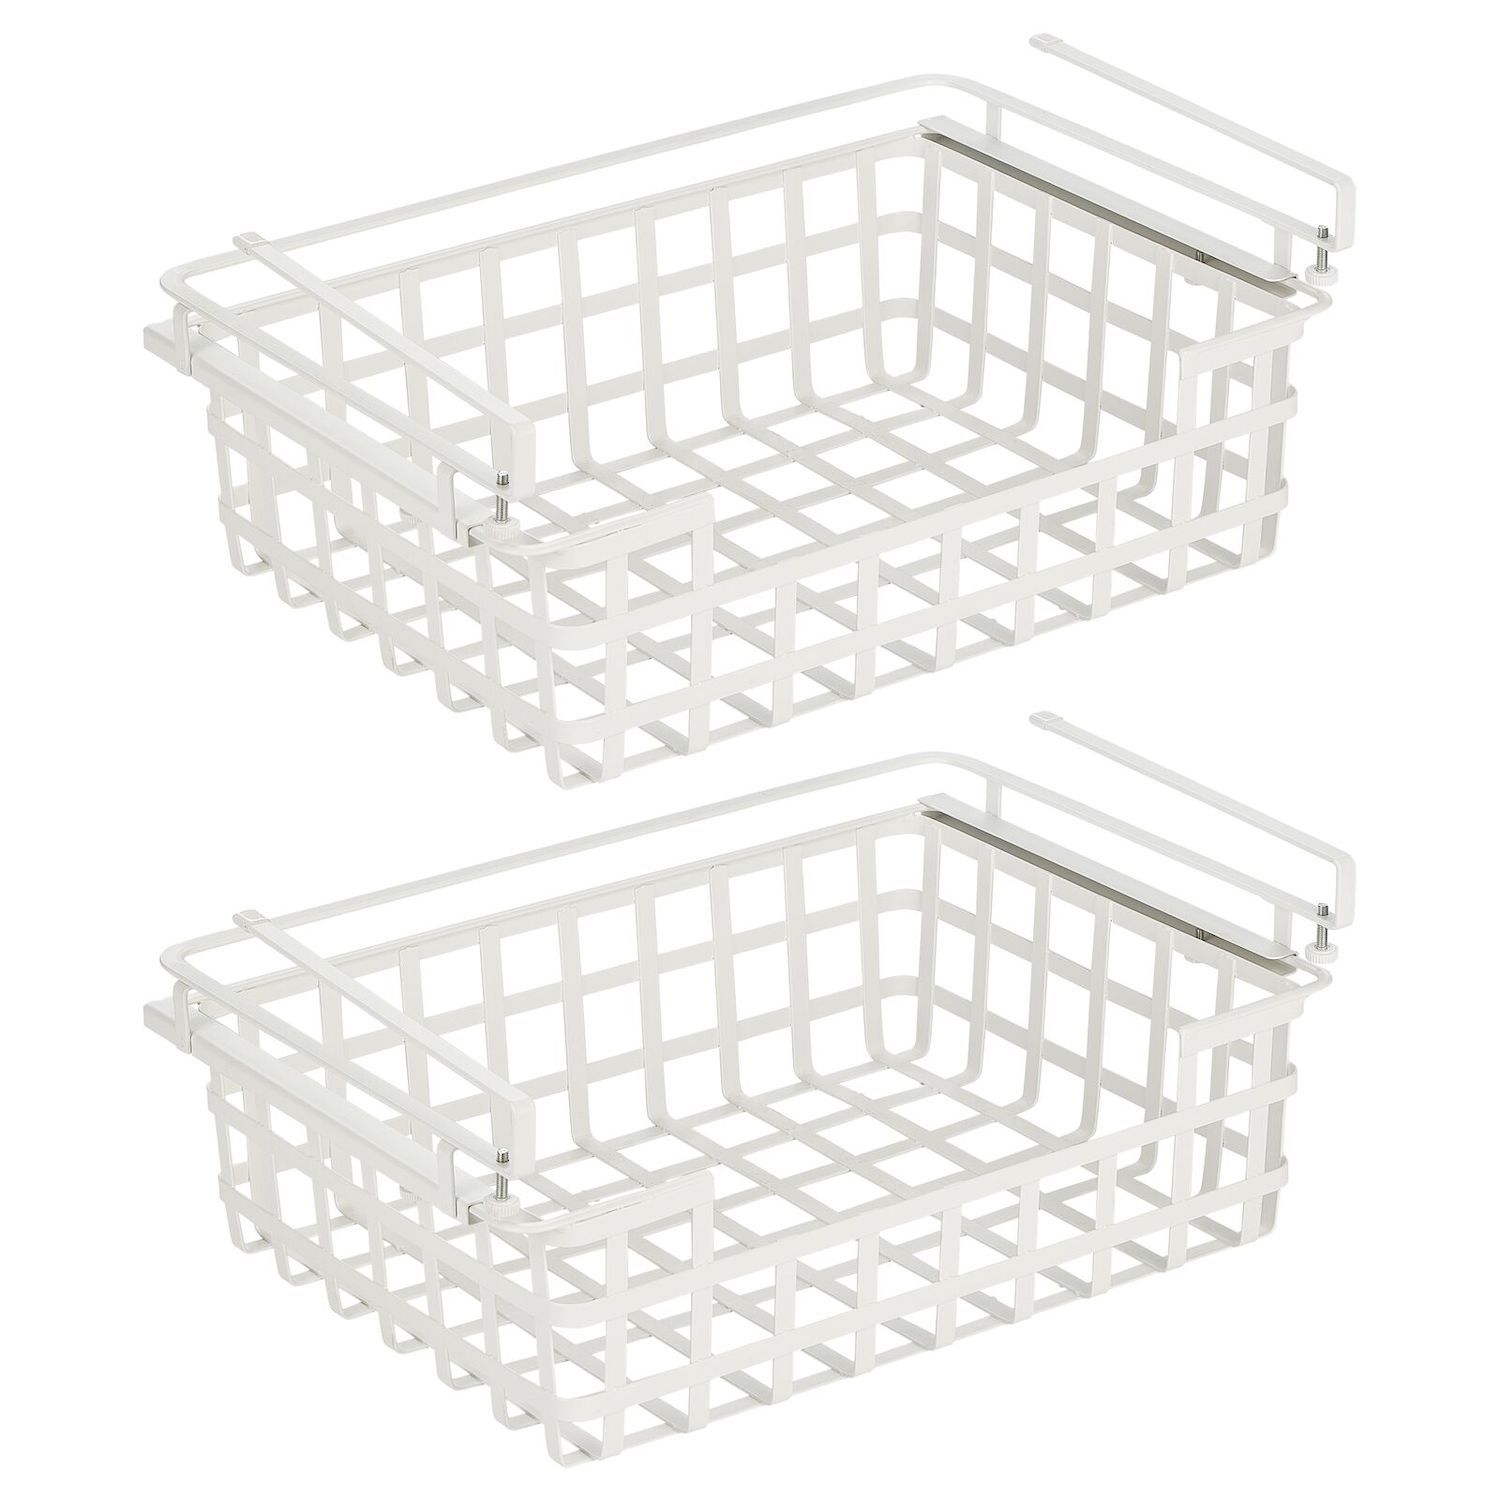 Storage Baskets - Chrome Double Pull-Out Wire Baskets w/ Full